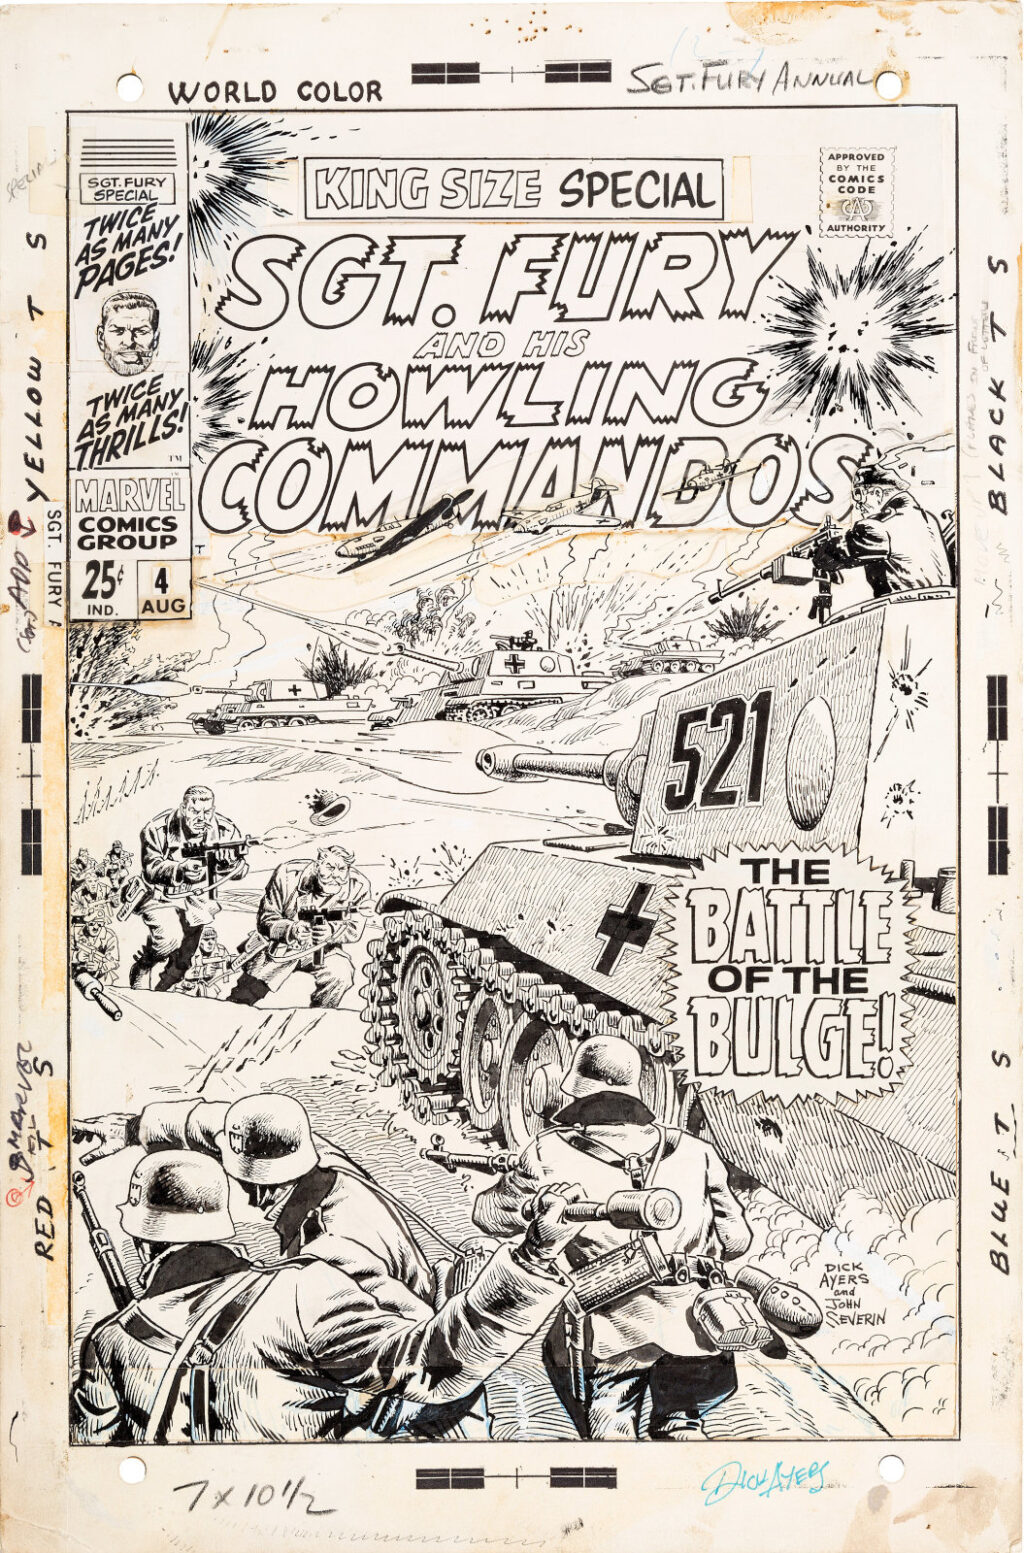 Sgt. Fury and His Howling Commandos King Size Special 4 cover by Dick Ayers and John Severin